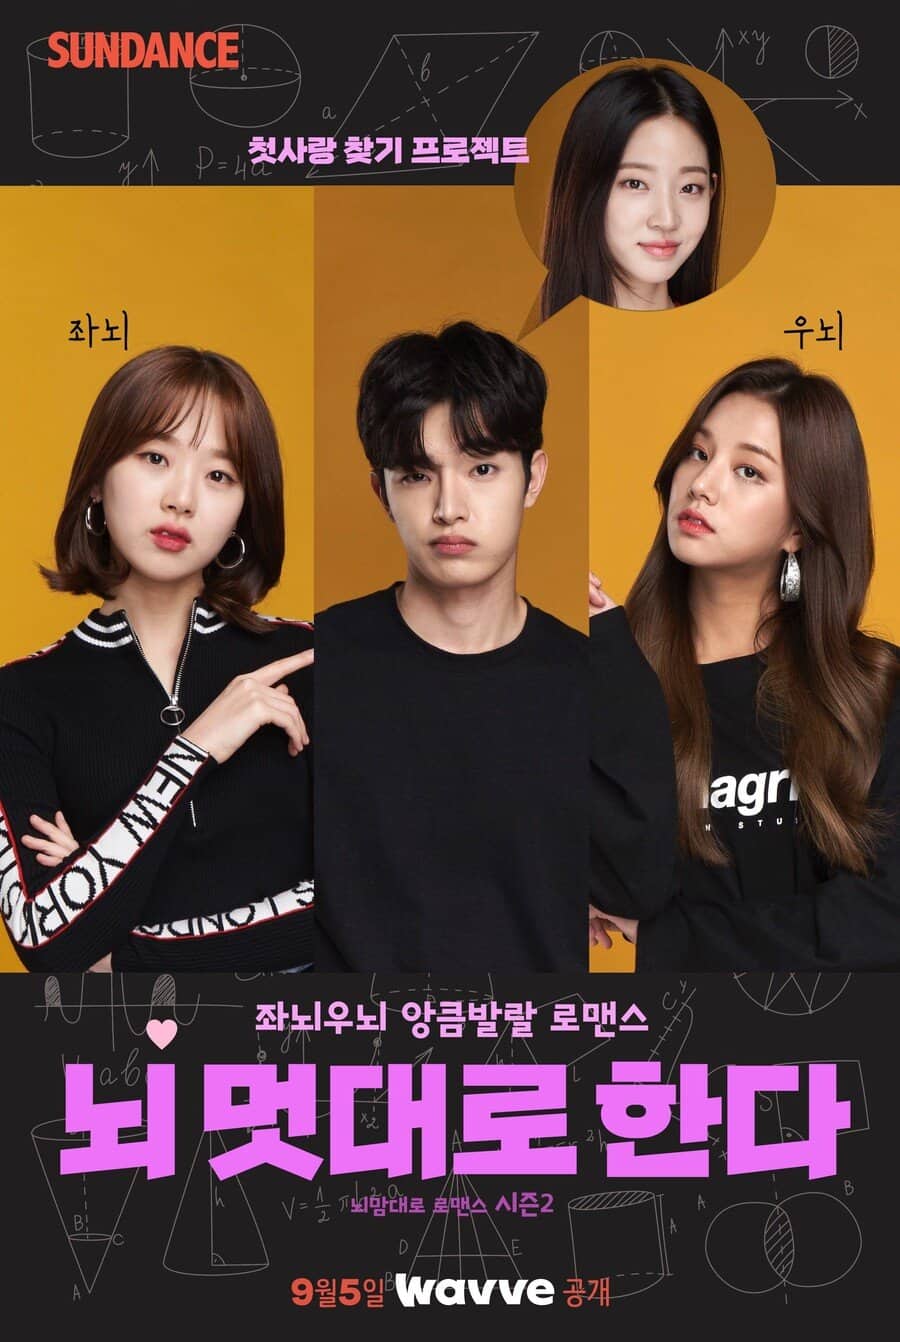 Brain, Your Choice of Romance Season 2 - Sinopsis, Pemain, OST, Episode, Review